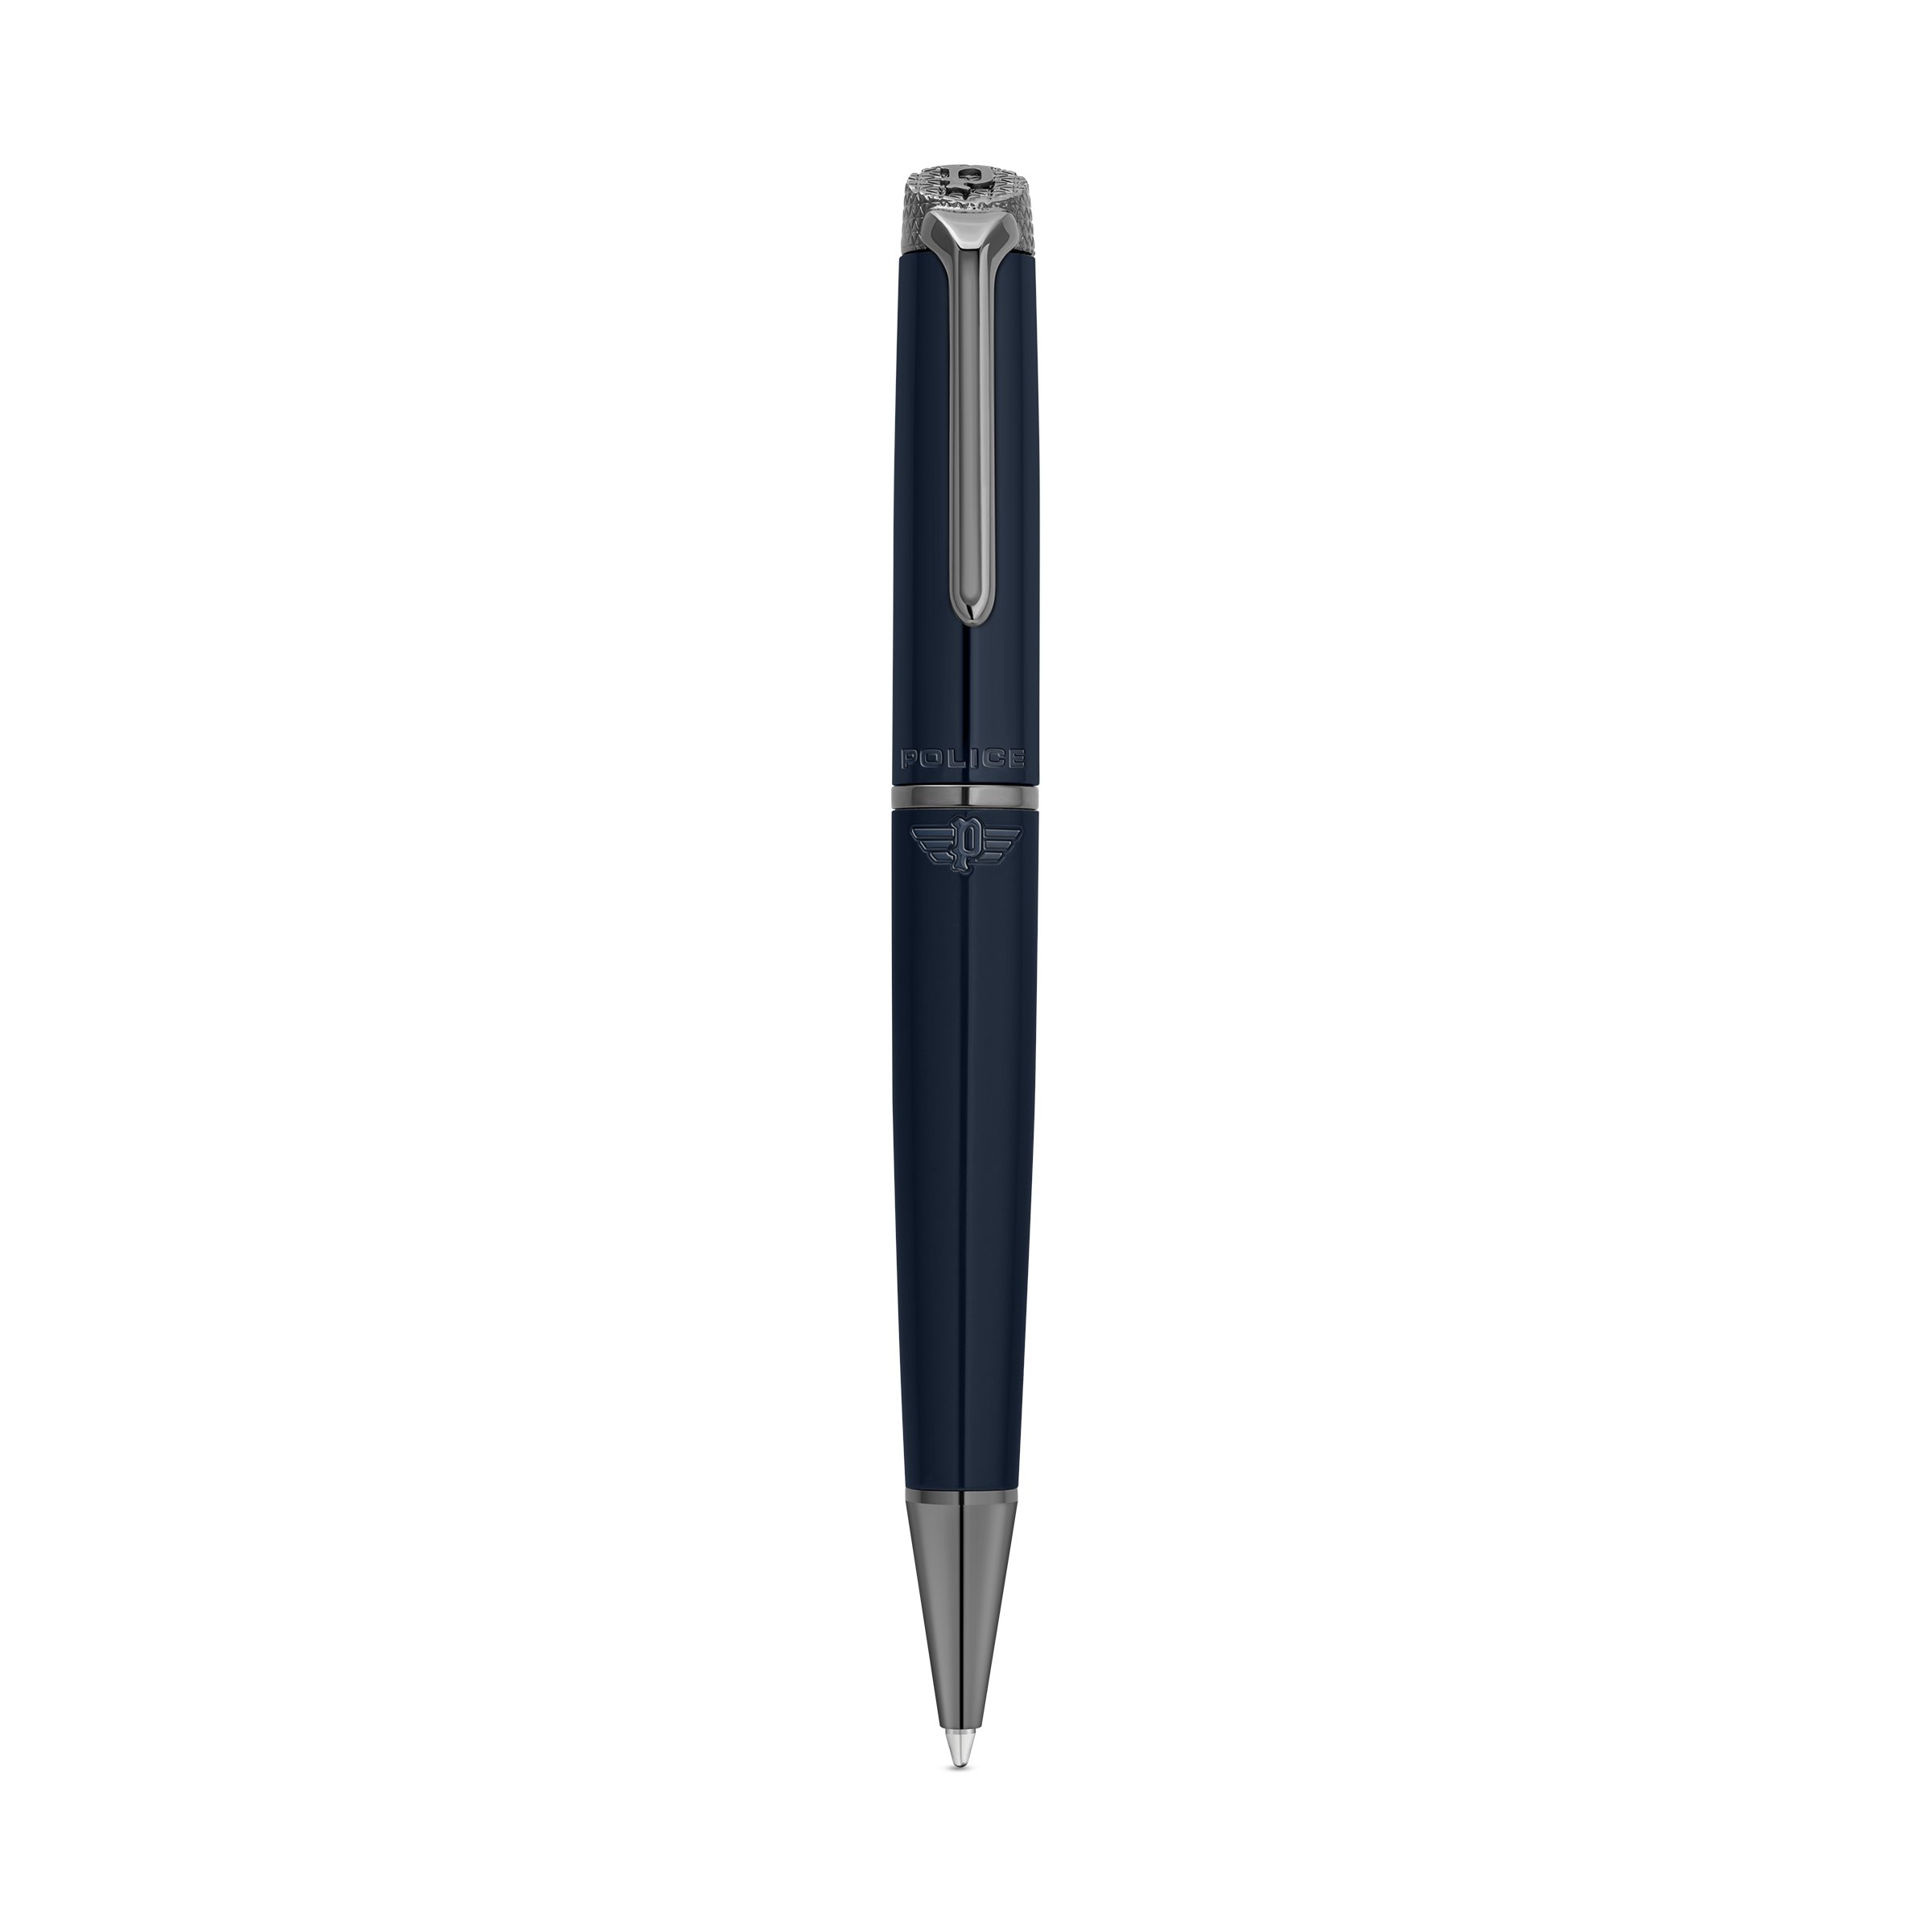 <p><strong><span style="color: rgb(1, 1, 1)">POLICE - Vanessa Pen For Men Black &amp; Gunmetal Color - PERGR0001202</span></strong></p>